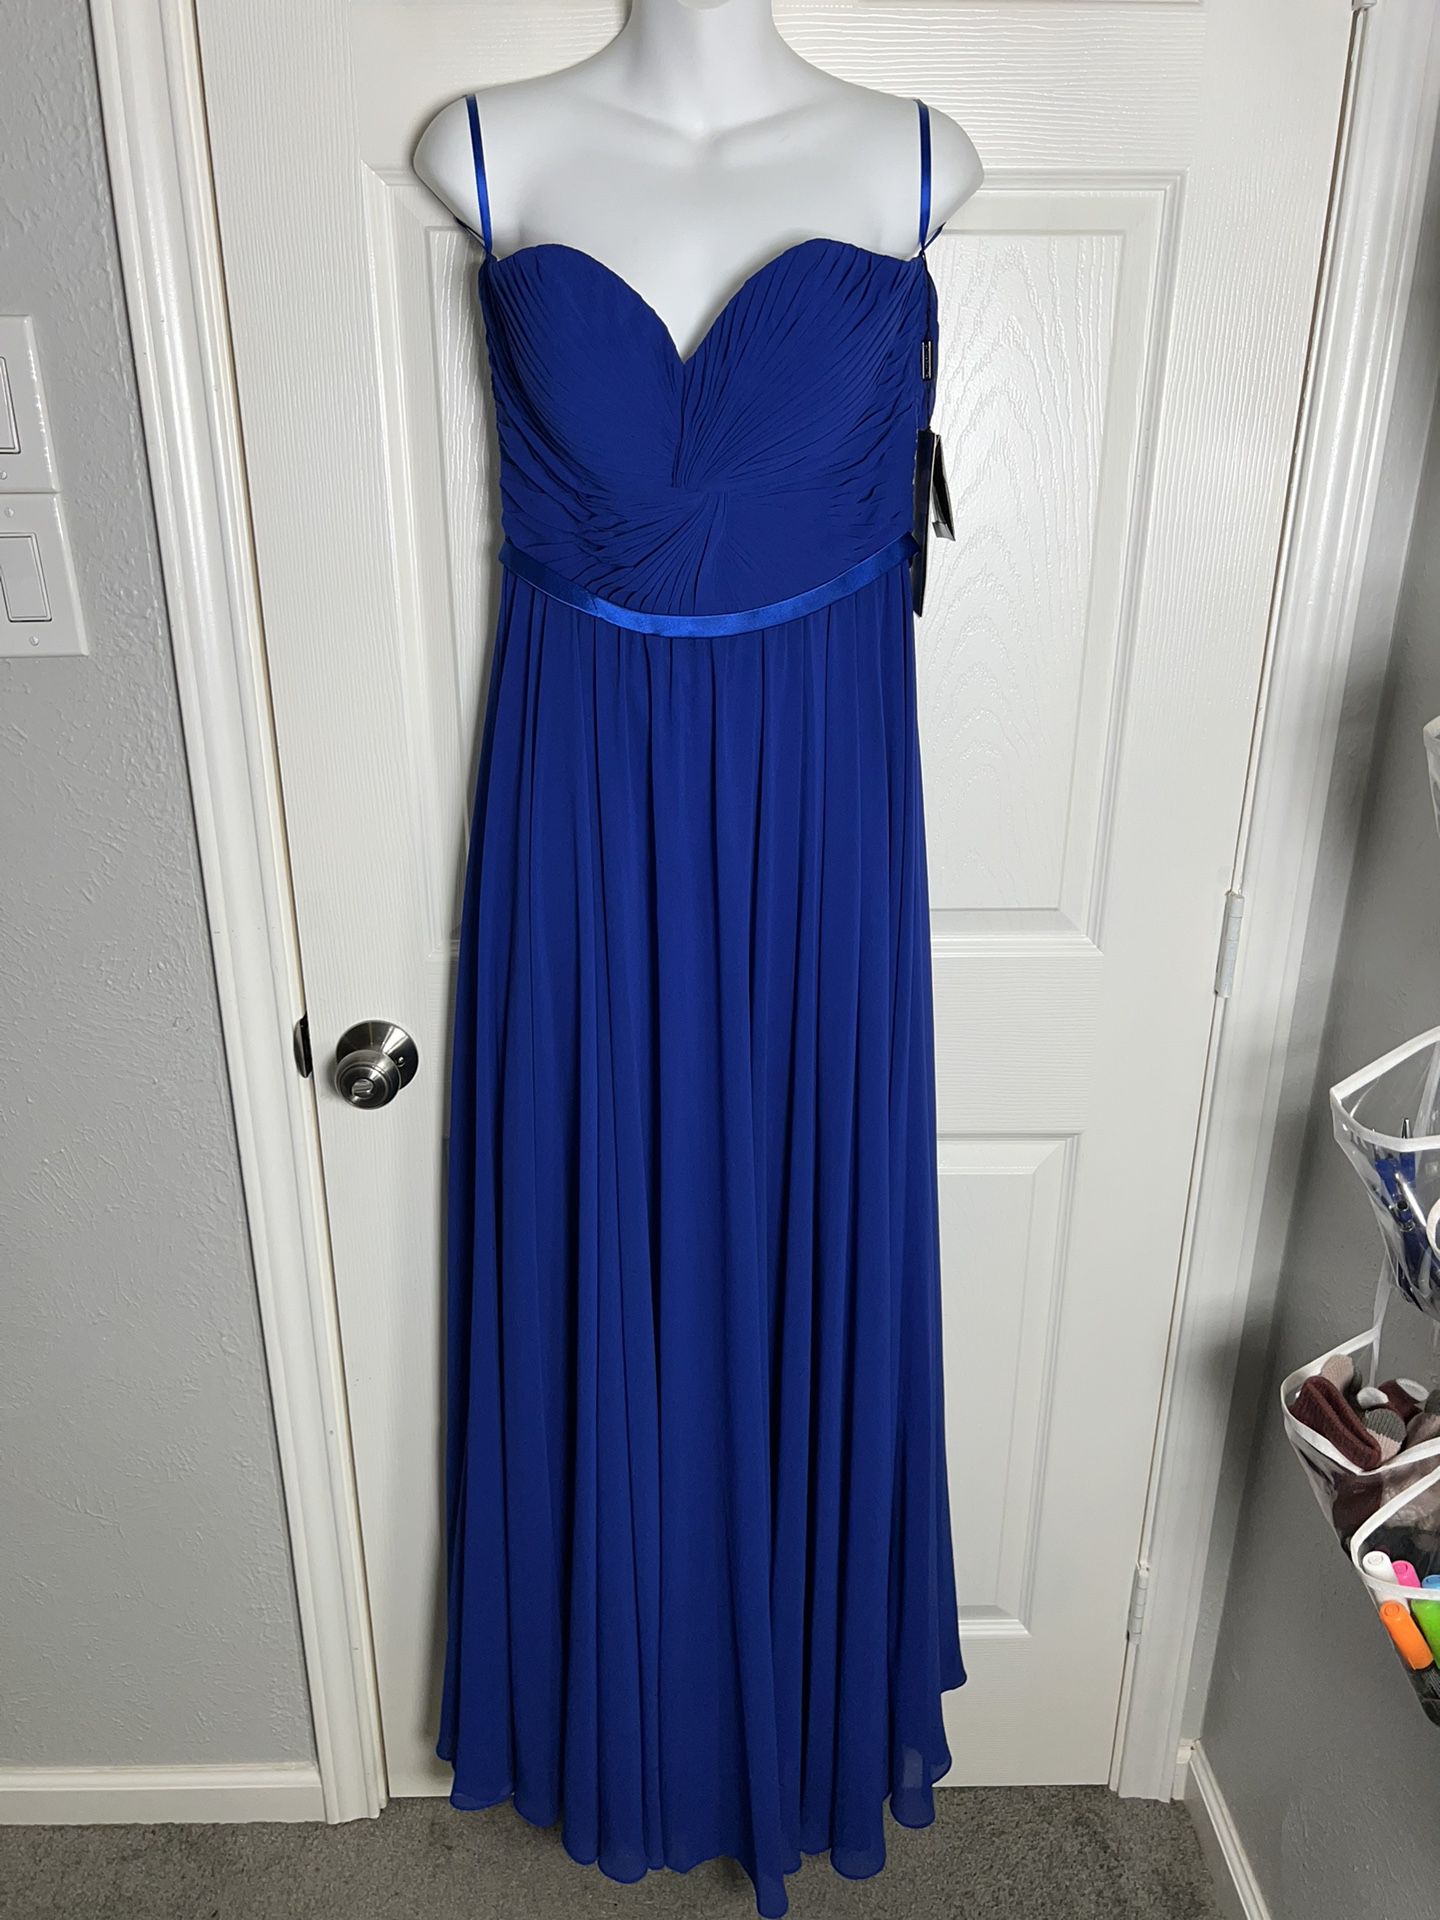 Strapless Royal Blue Ball gown 